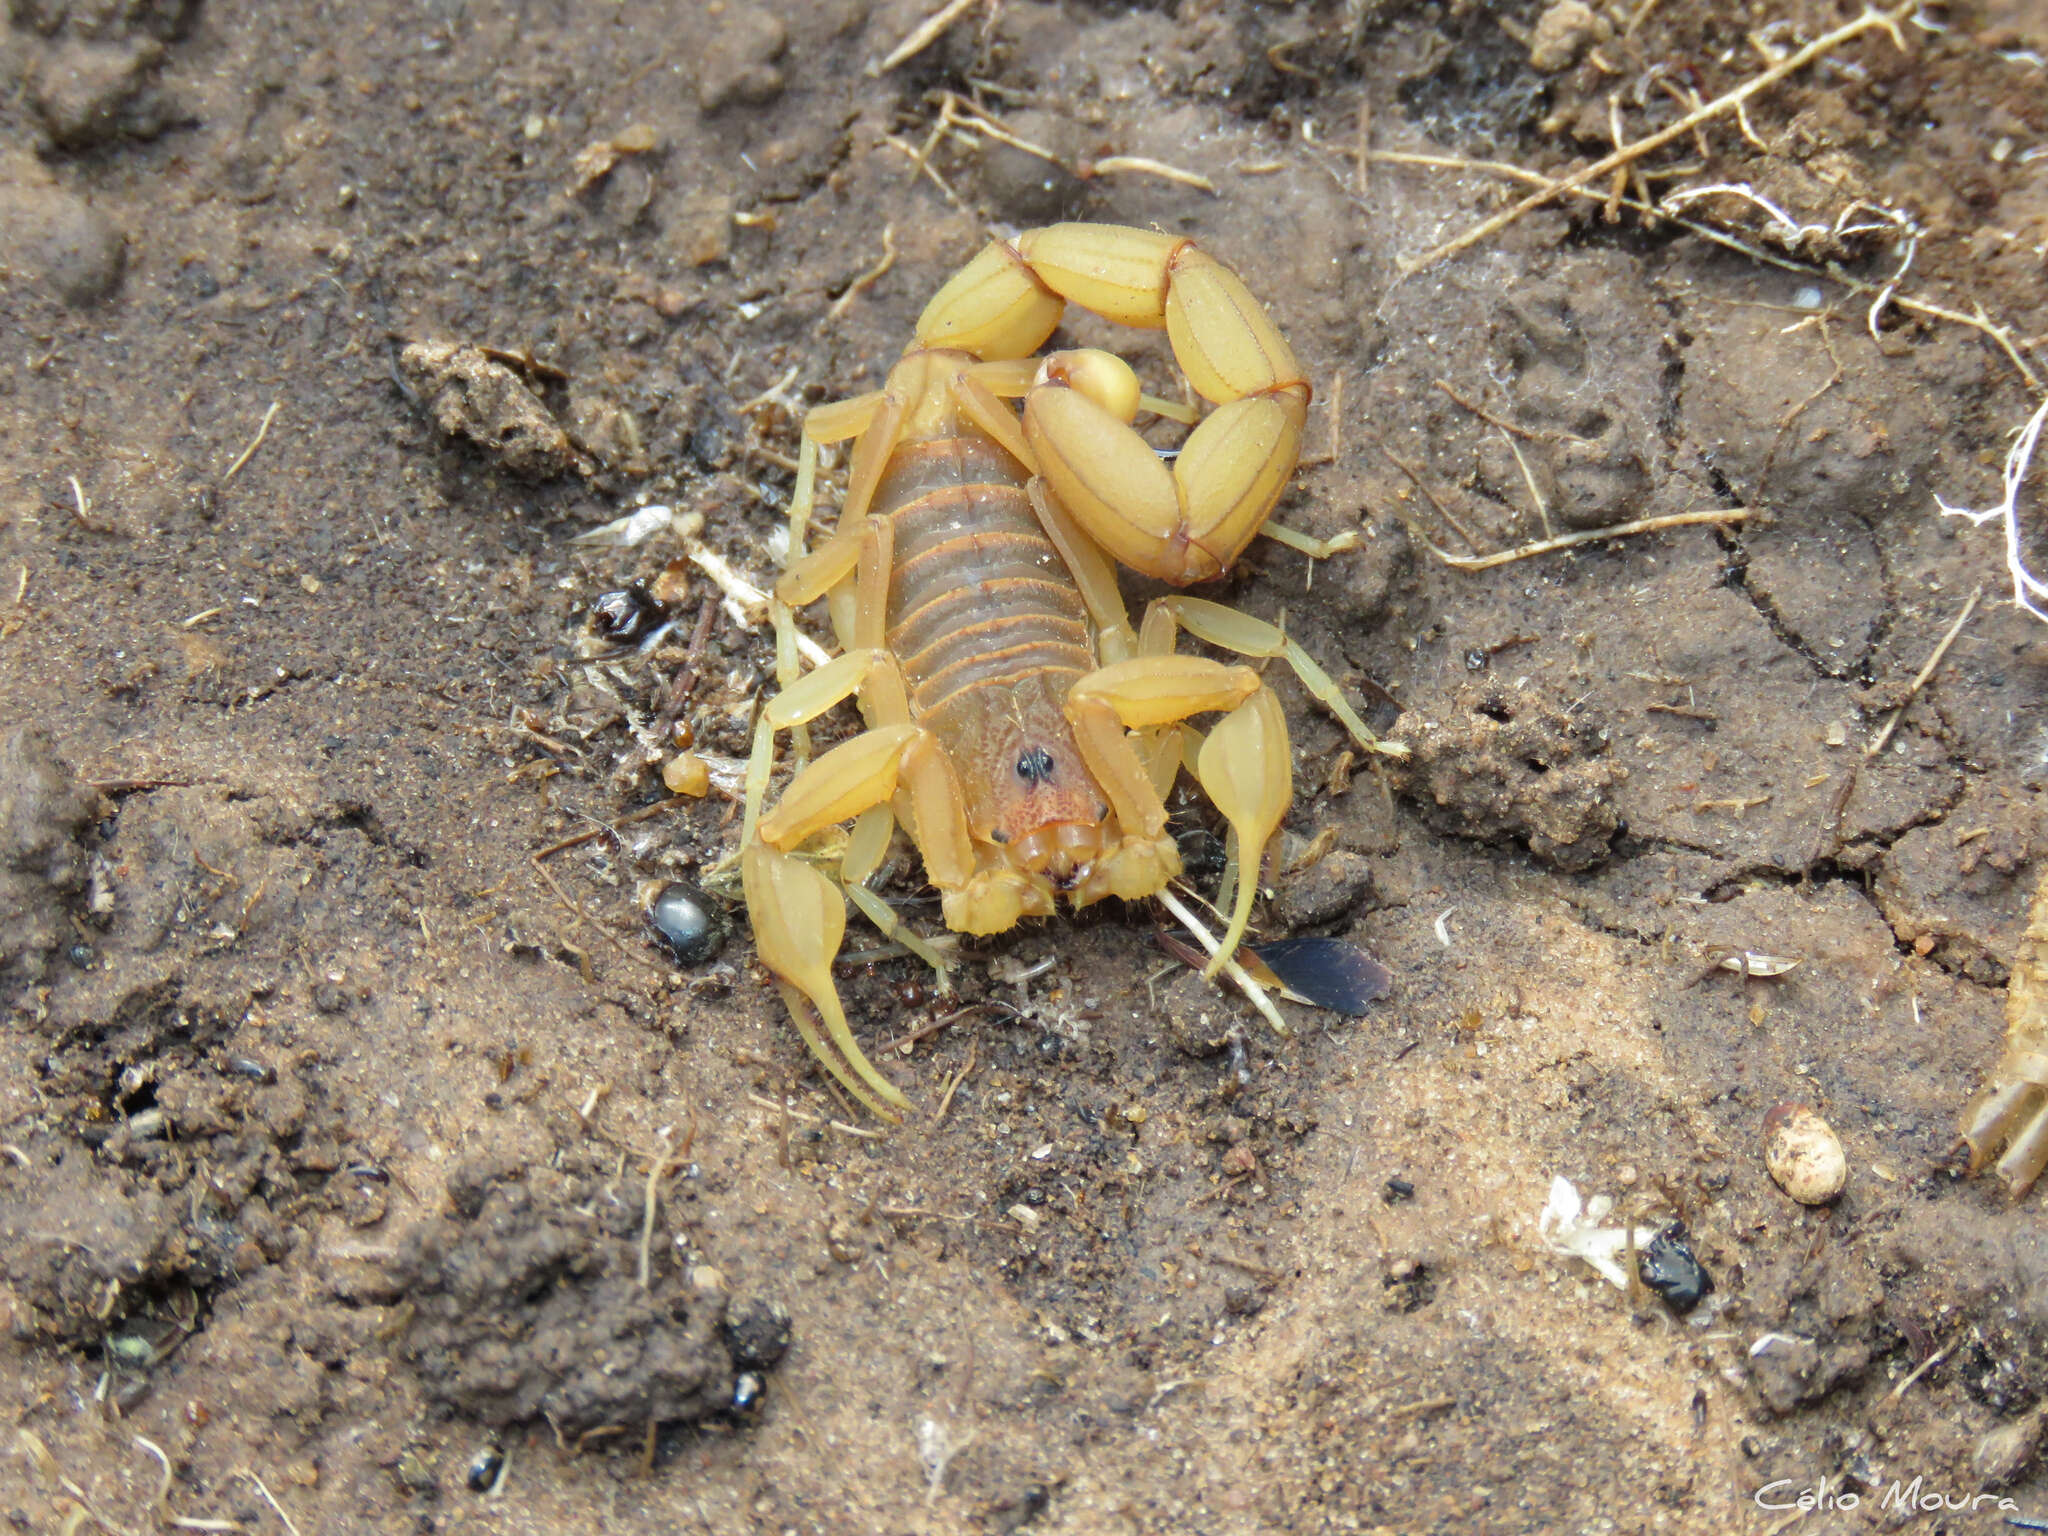 Image of fat-tailed scorpions